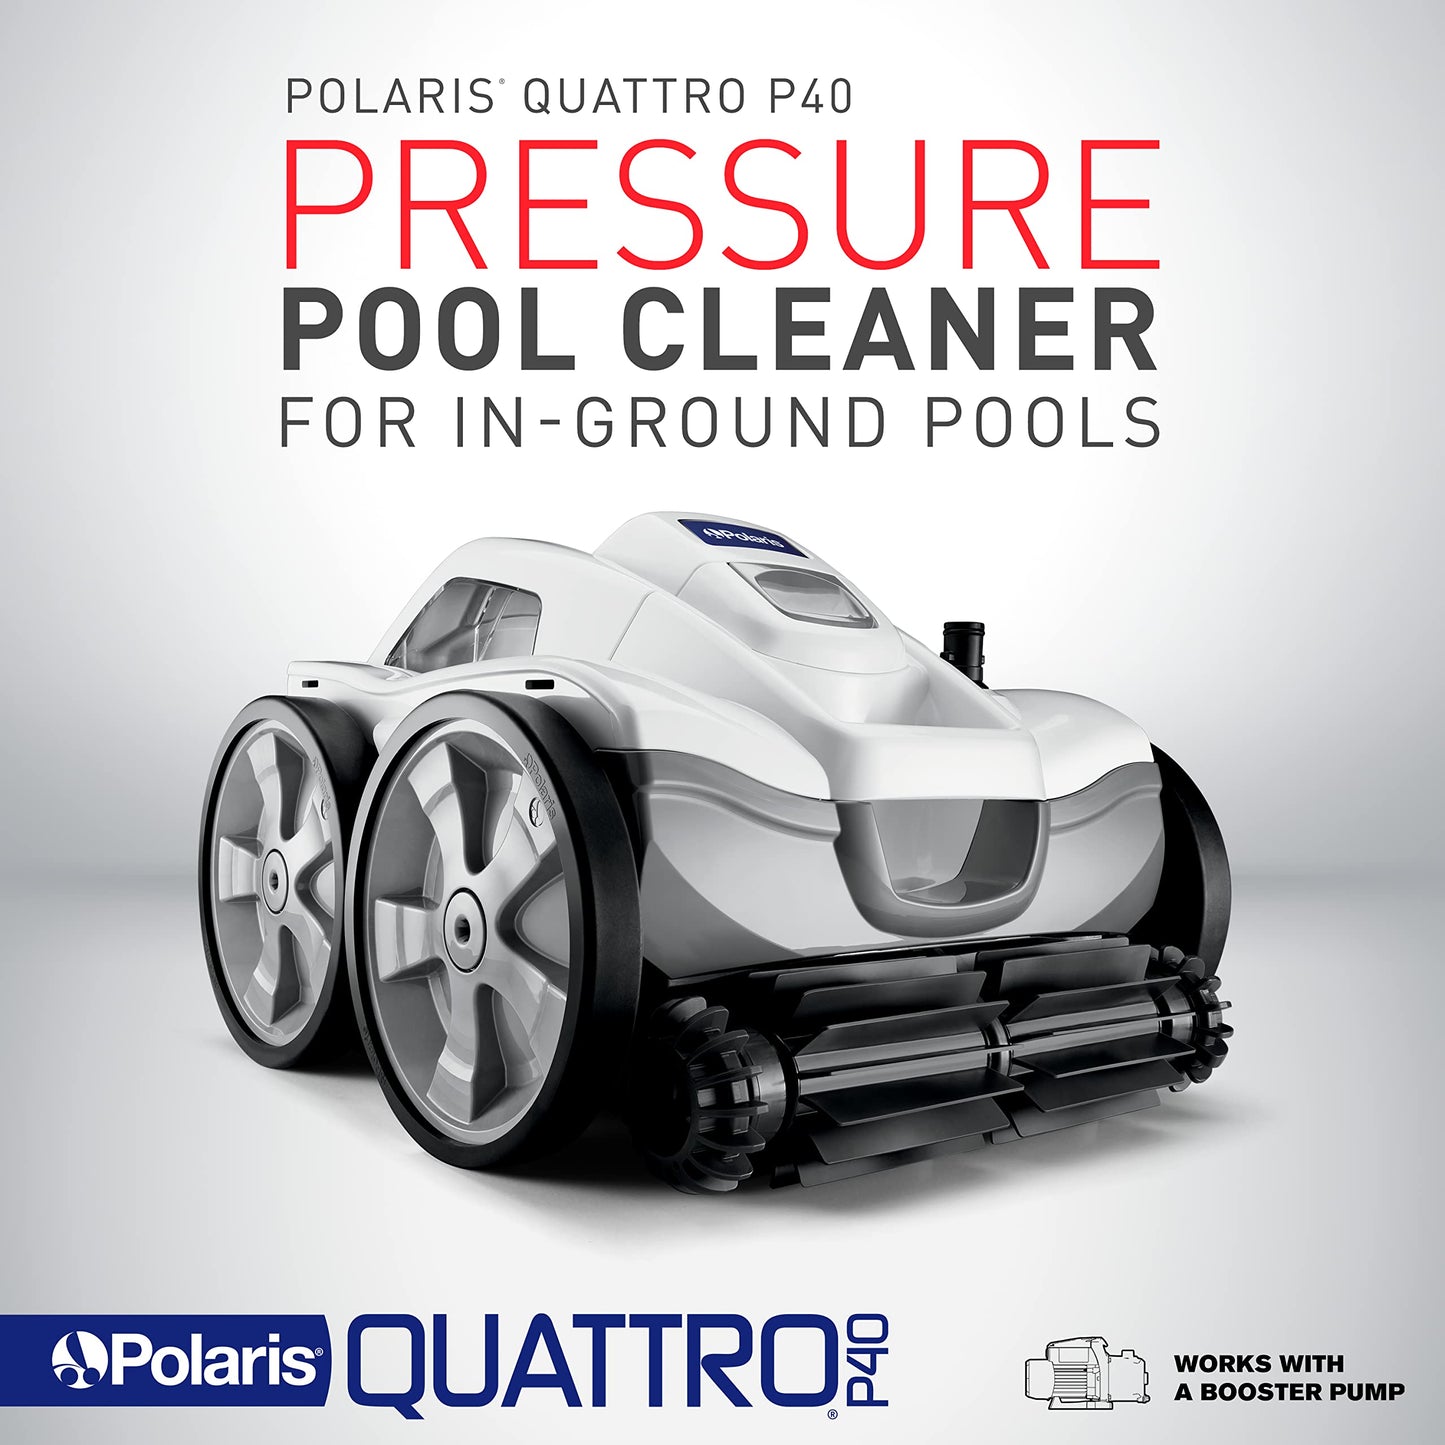 Polaris Quattro P40 Pressure Side Pool Cleaner for All In-Ground Pool Surfaces, Large-Capacity Dual Filtration Canister, 31' Hose & Transparent Lid to View Debris